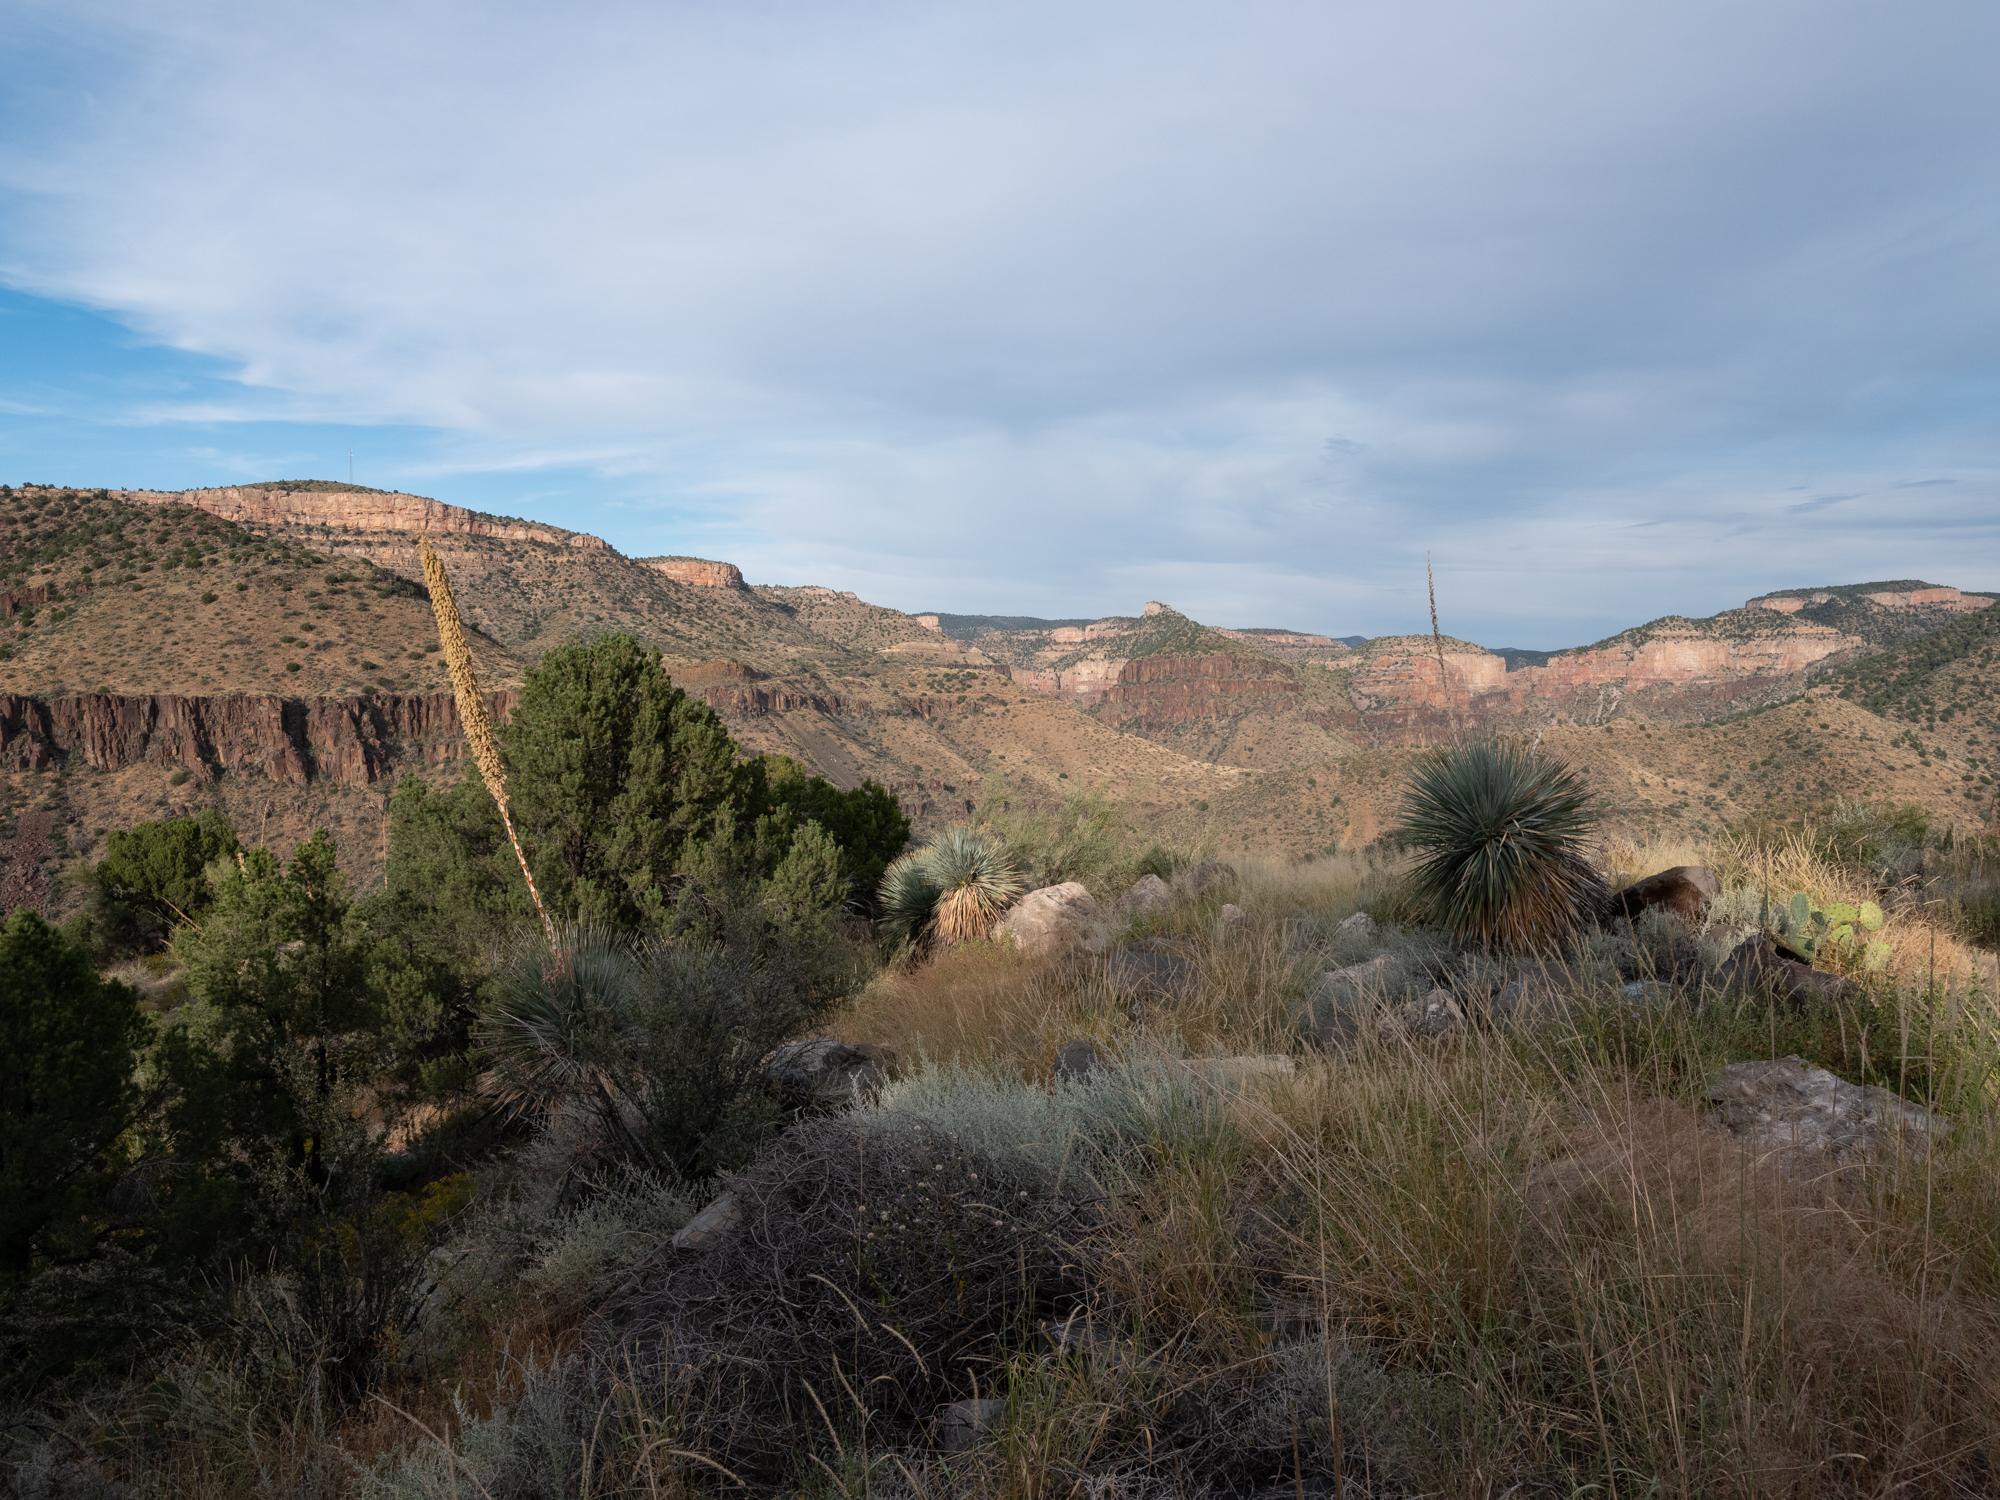 New Arizonans - HuffPost - Looking out over the Salt River Canyon on the White...